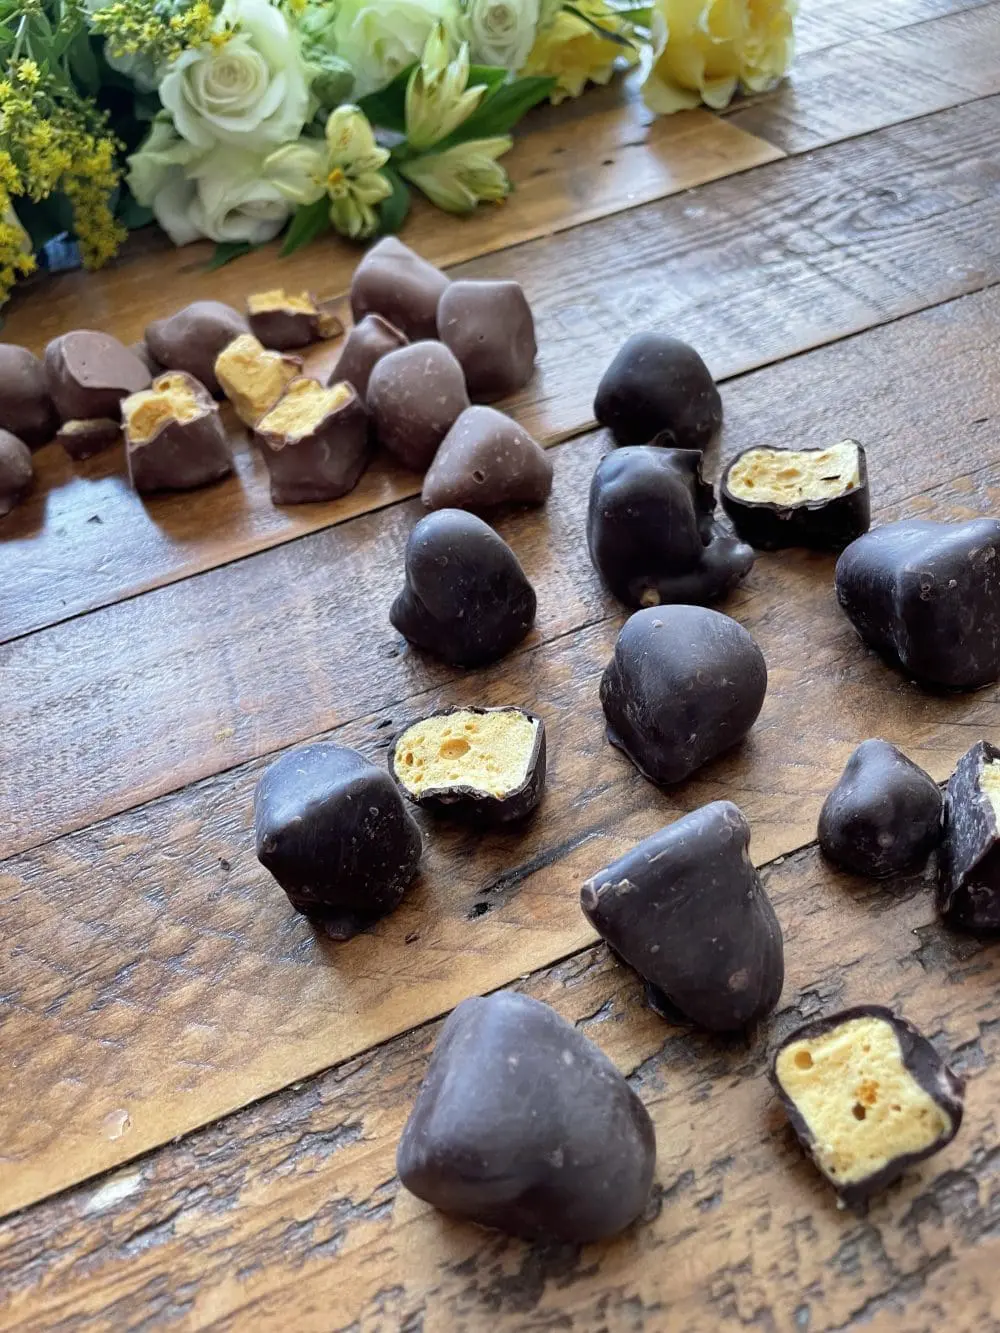 Yummycomb Nuggets of Premium Belgian chocolate covered honeycomb in bite size pieces. On a rustic wooden country able there is a range of 70% Dark chocolate orange and milk Belgian chocolate.